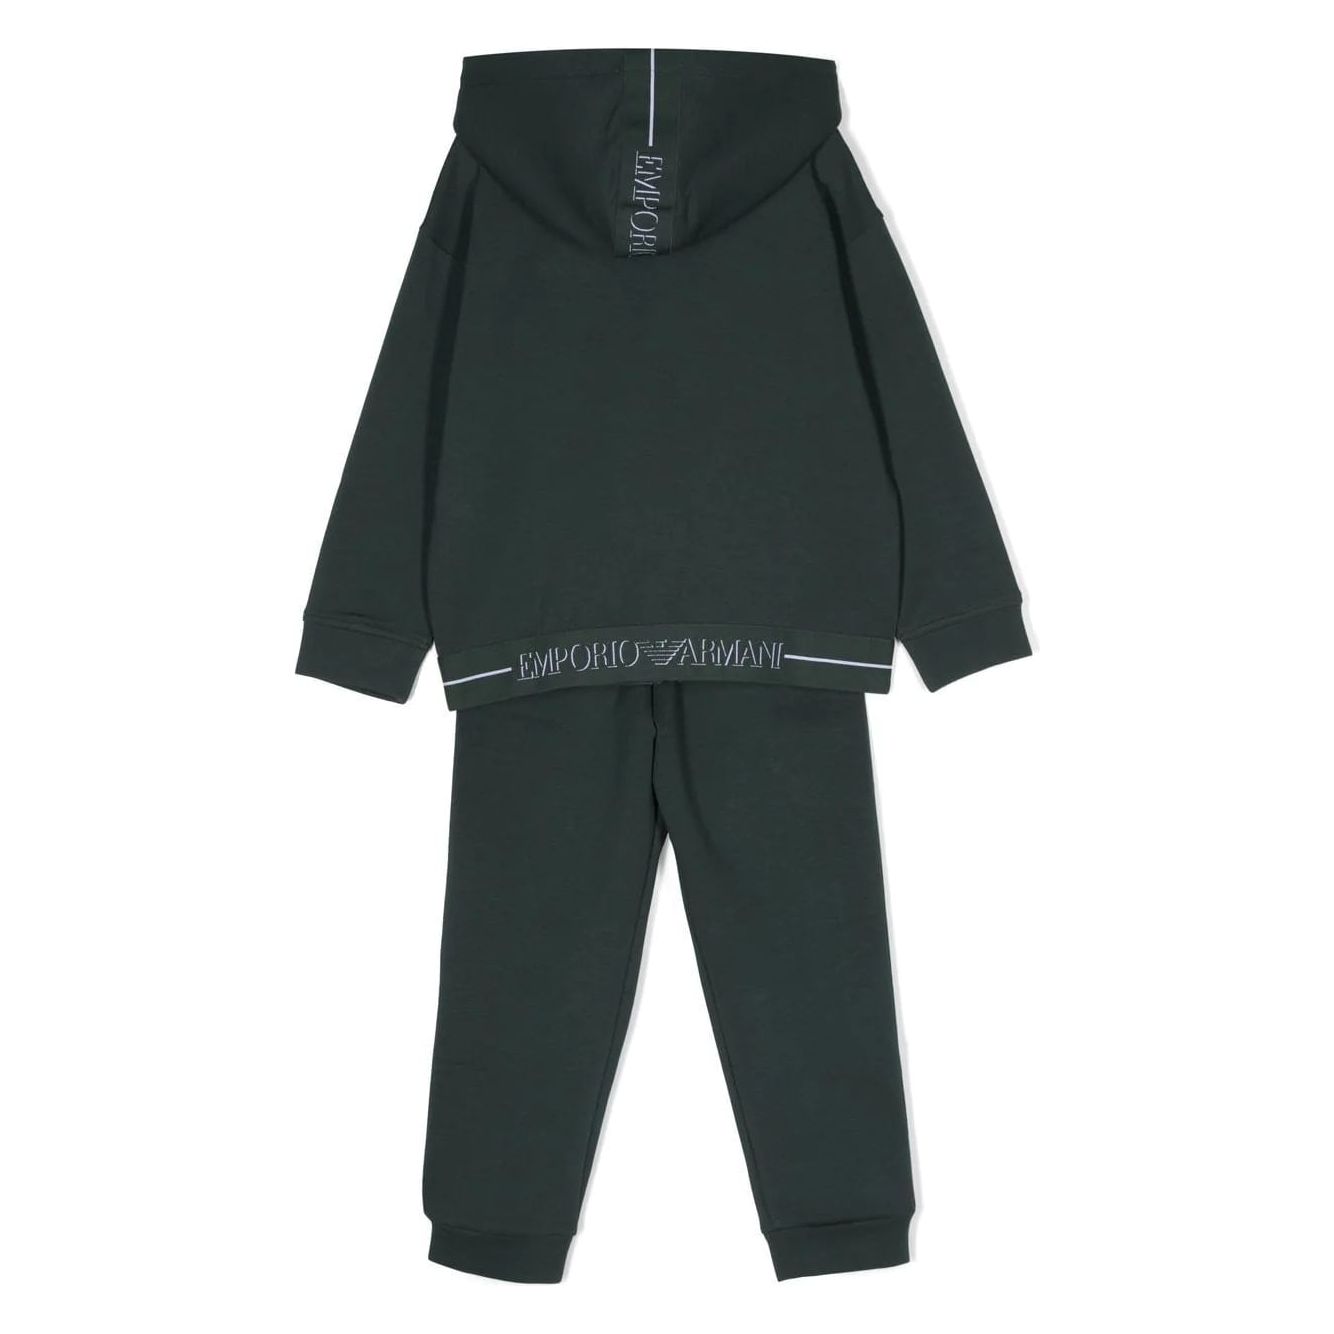 EMPORIO ARMANI KIDS SPORTS SUIT WITH HOOD - Yooto